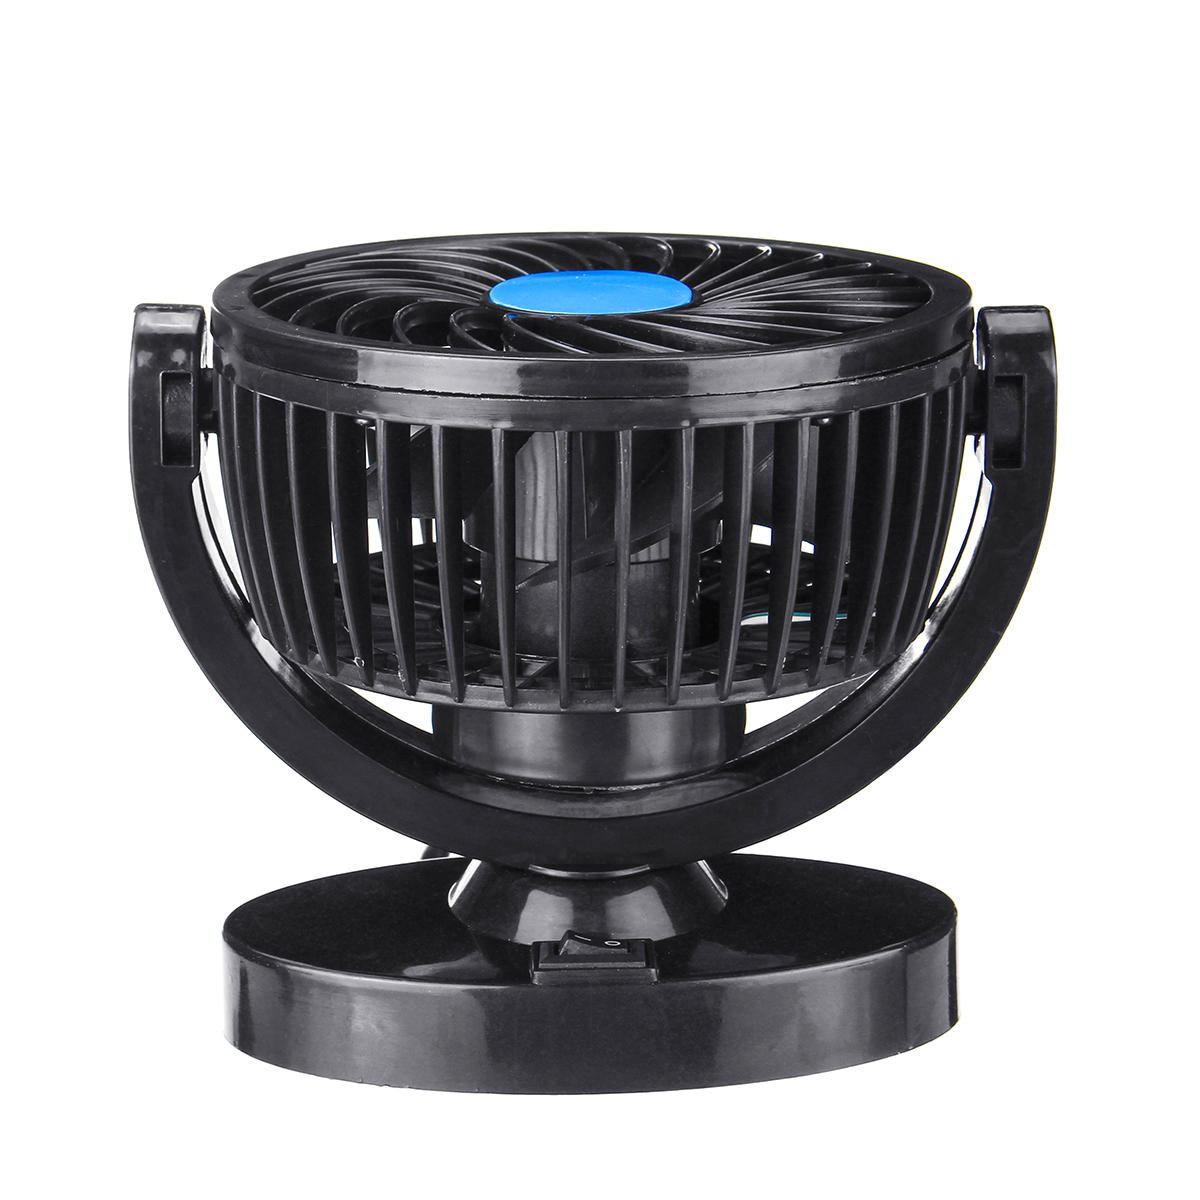 DC 12V/24V 360 All-Round Mini Auto Air Cooling Fan Adjustable Low Noise